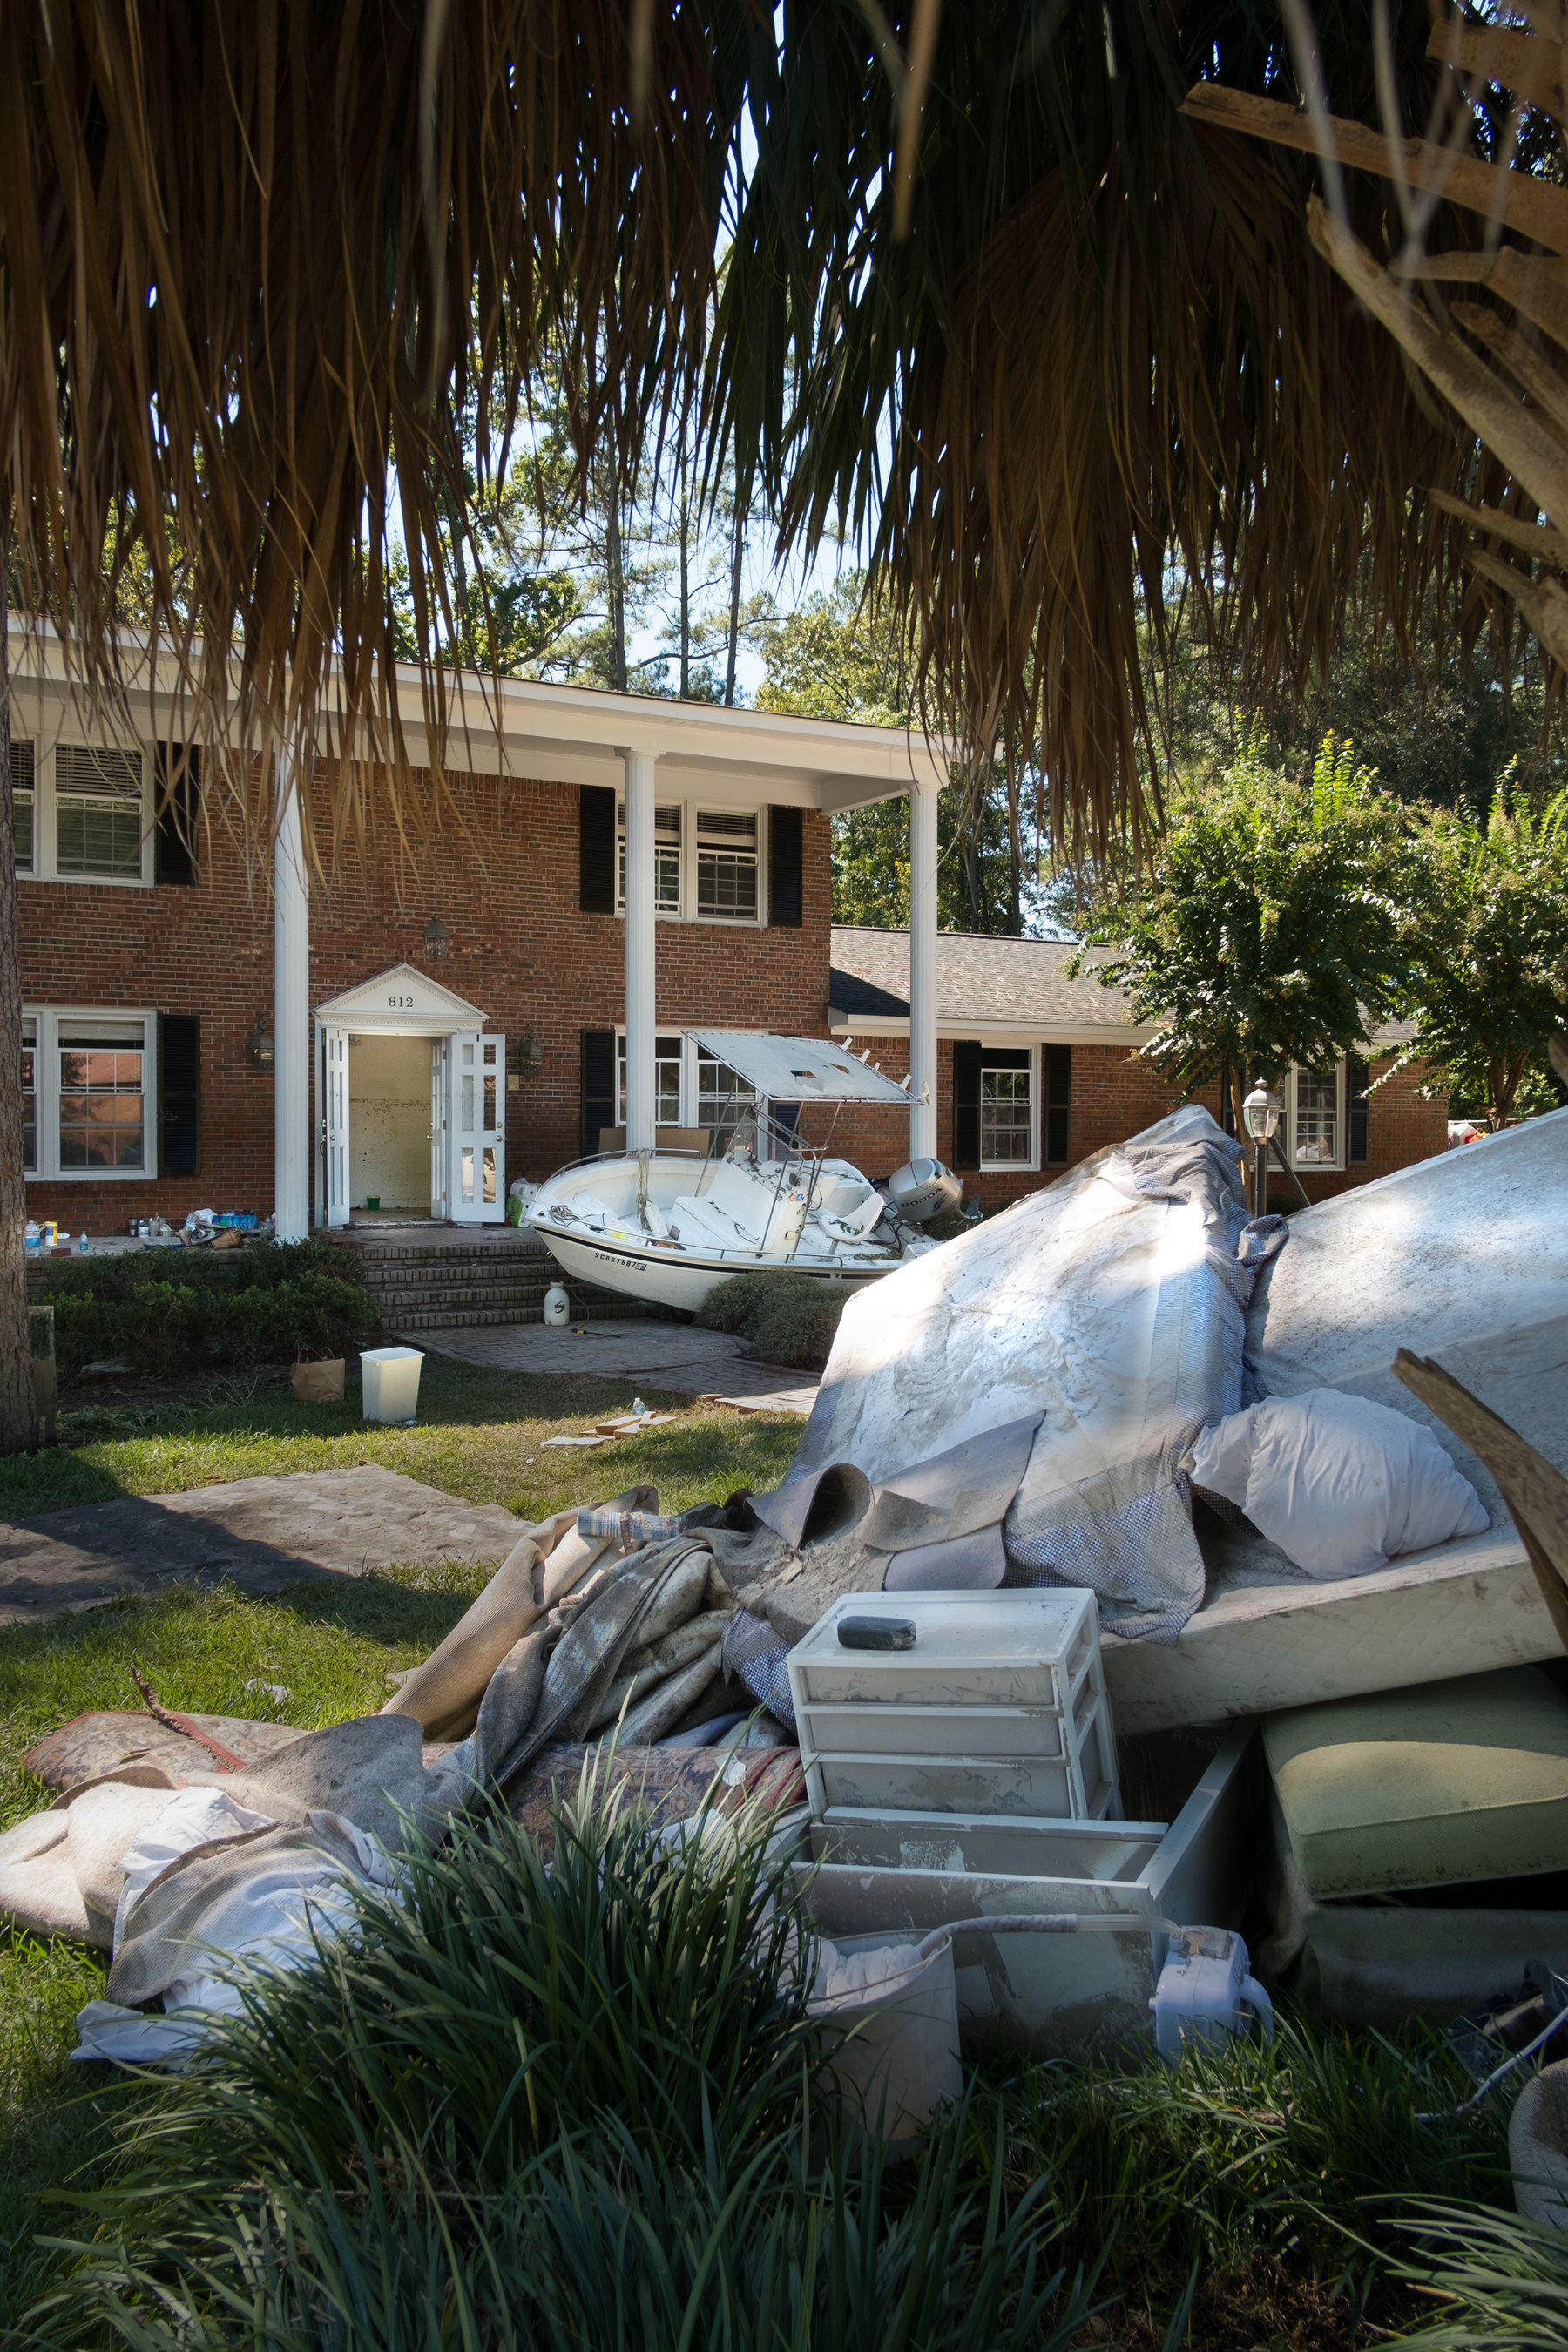 Destroyed homes, flooded to the rooftops on Burwell Street in Columbia, South Carolina, are emptied of their contents as volunteers and disaster relief workers rebuild after floods devastated the area in early October, 2015. 100% of donations at www.yourfoundation.org/scfloodrelief will go to direct flood relief organizations like Harvest Hope Food Bank. Central Carolina Community Foundation started the zero overhead fund to help connect donors and fundraising events with the S.C. nonprofits who need donations most desperately in the short and long term in the Midlands region of the Carolinas where flooding was worst. Photo: Jeff Amberg